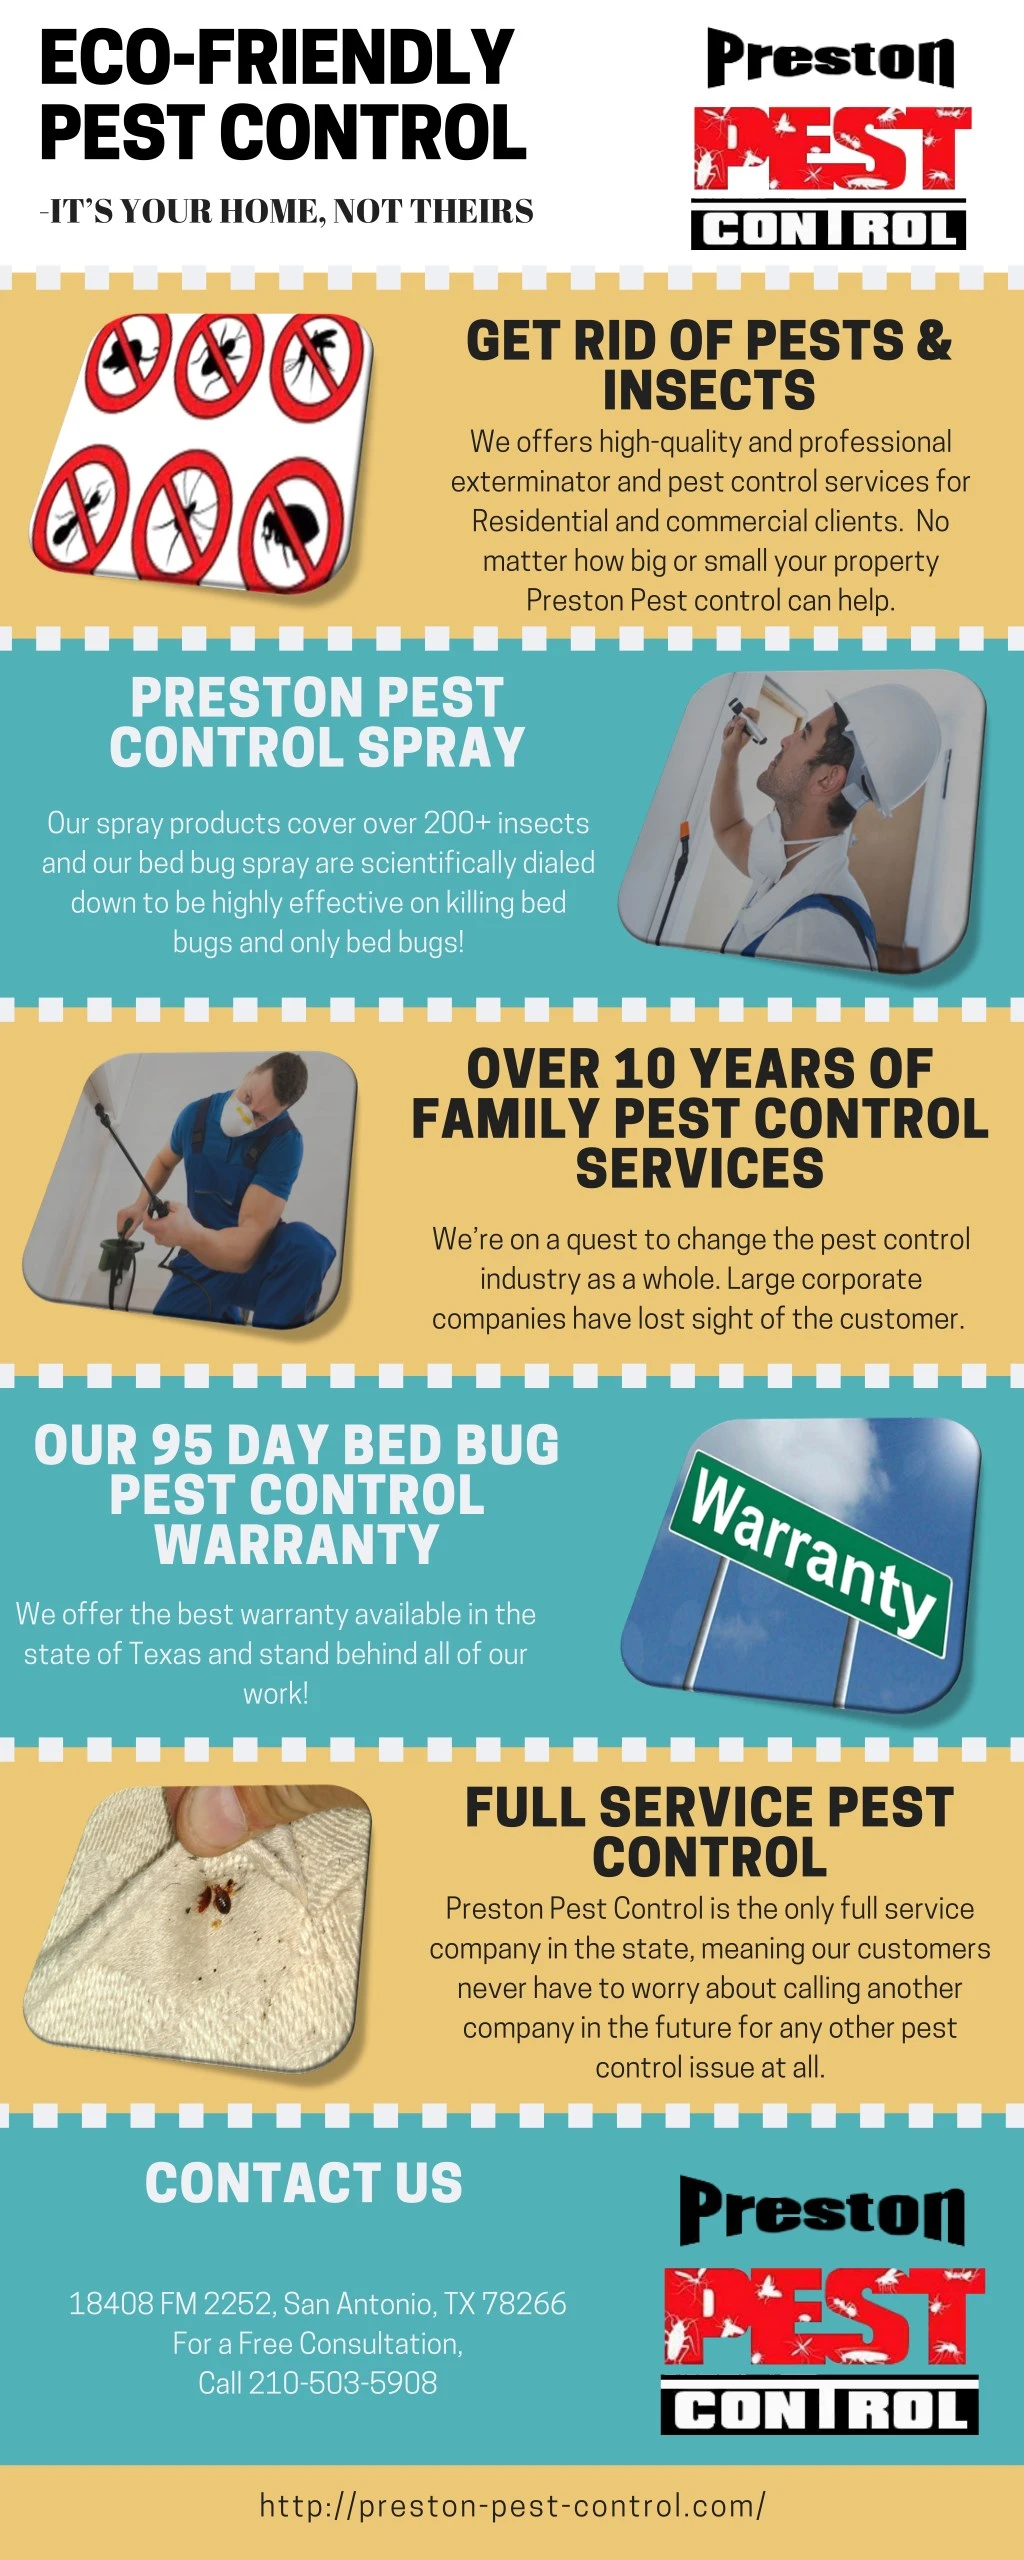 eco friendly pest control it s your home